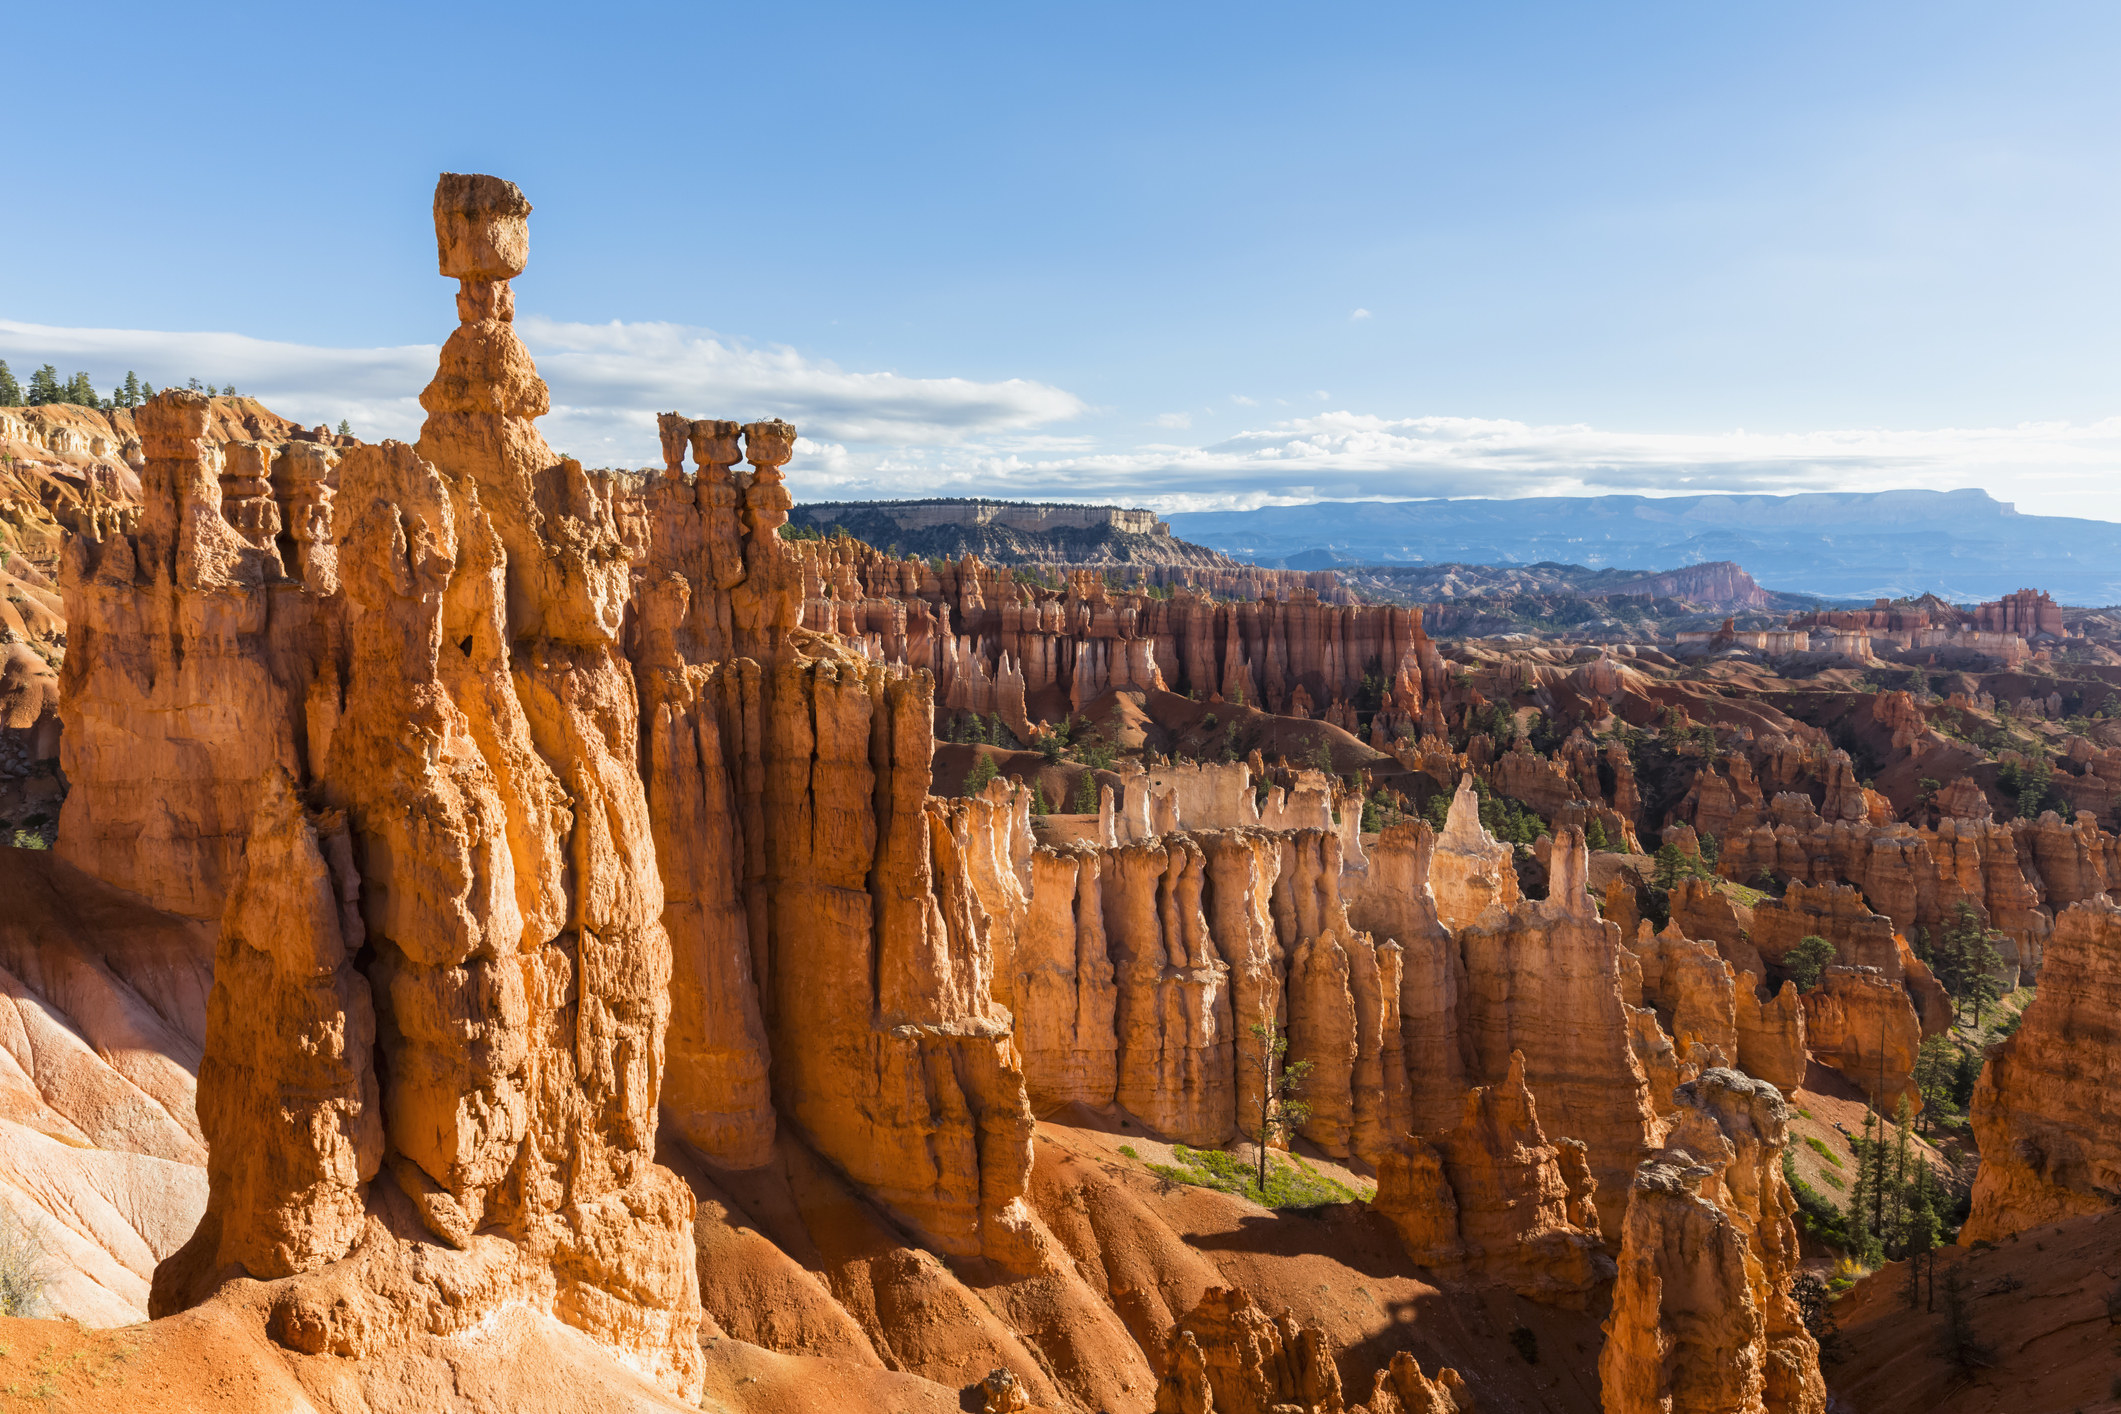 Hoodoos in amphitheater at Bryce Canyon National Park.